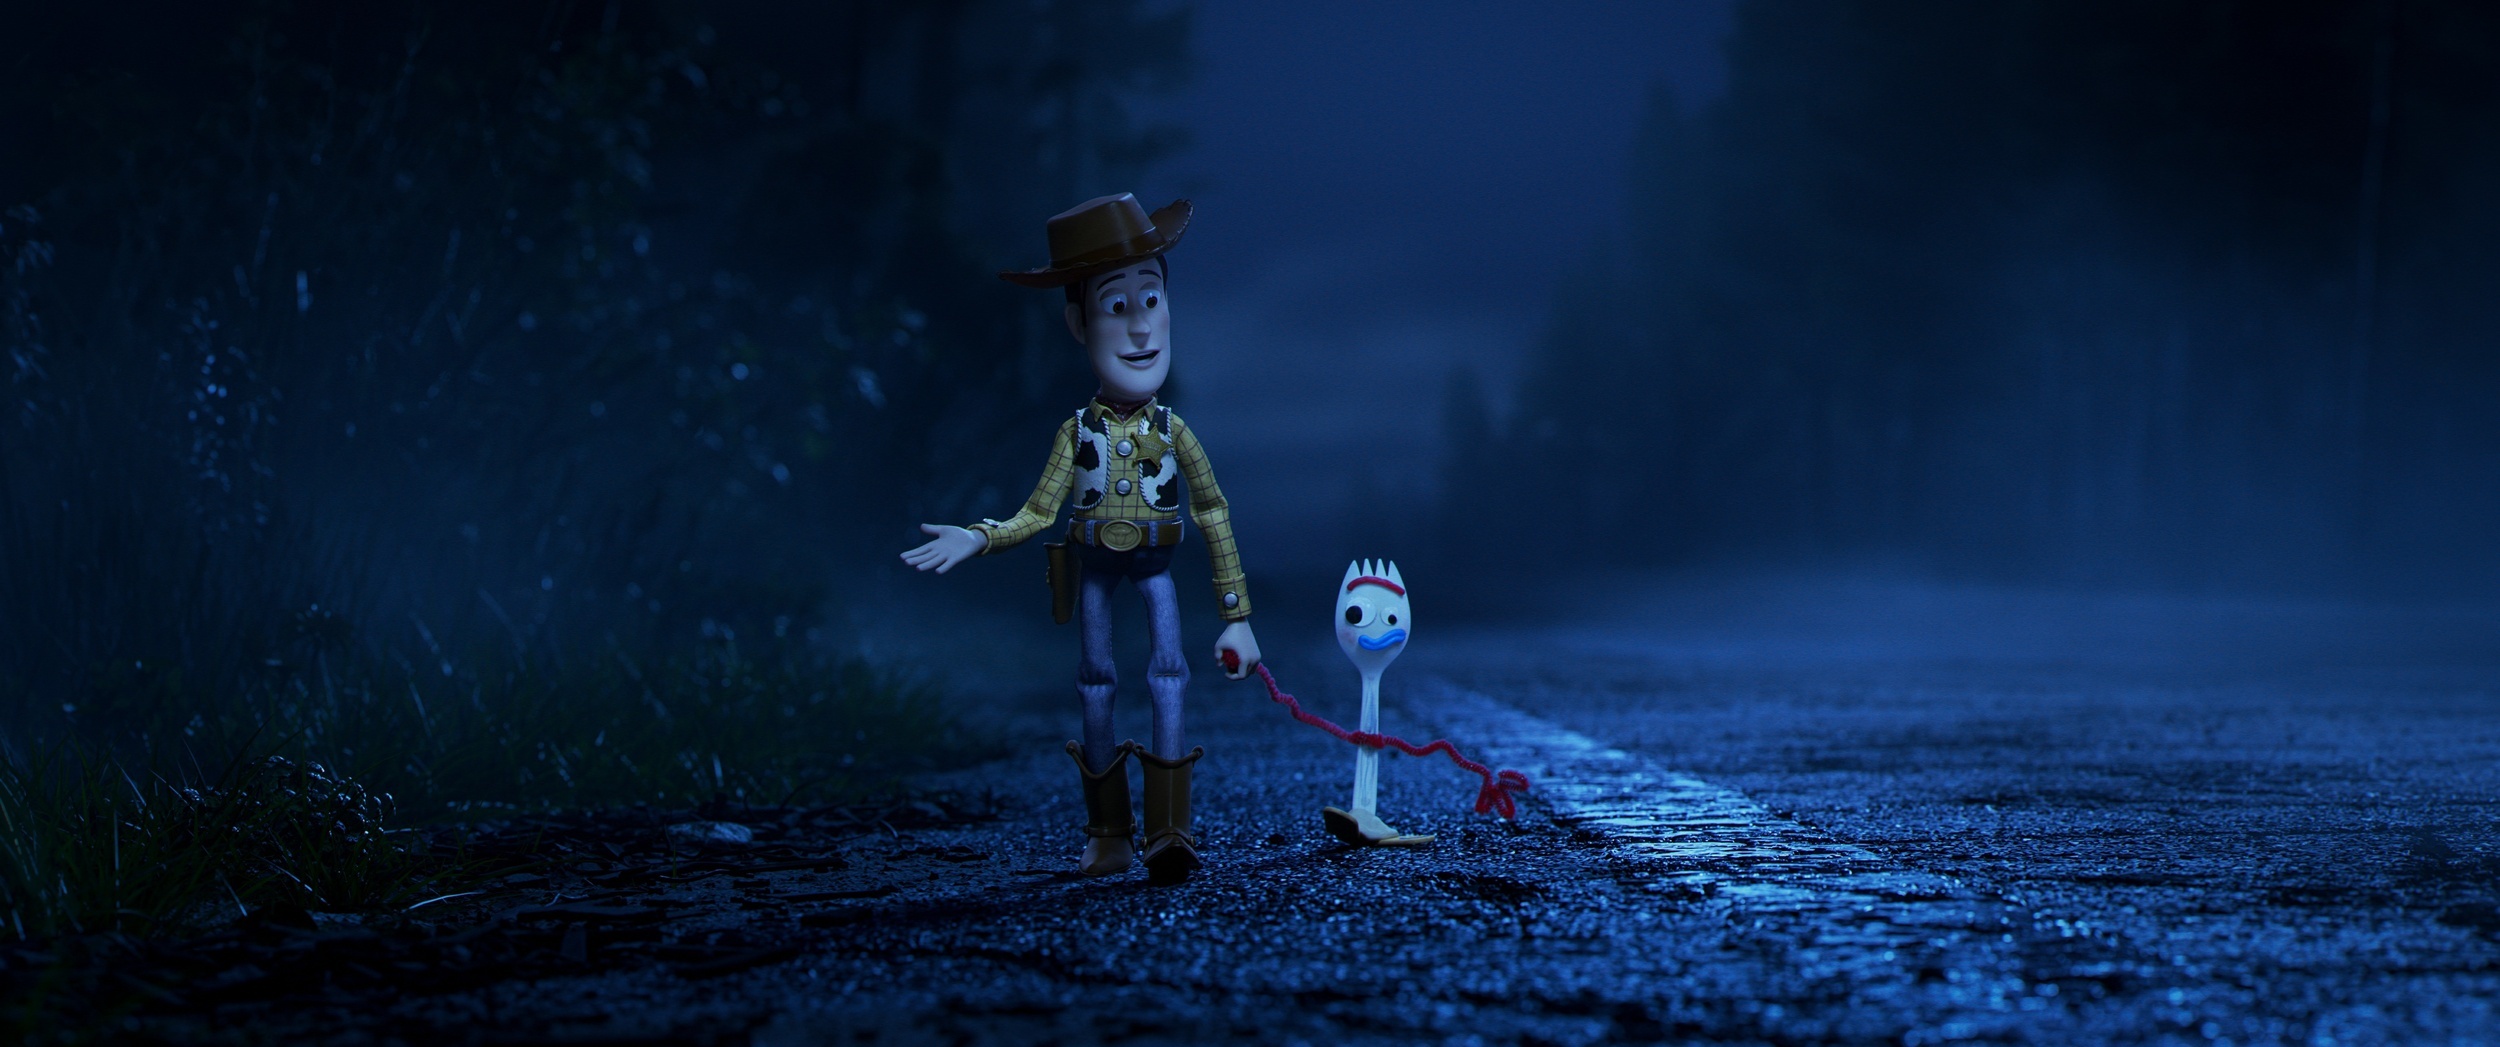 <p><span><em>Toy Story 3 </em>was the perfect ending, so it was odd that Pixar decided to come back with another, but many are grateful they did because, without <em>Toy Story 4</em>, there would be no Forky, a.k.a. one of the most relatable characters to ever appear on the big screen. “I’m trash.” Same, Forky, same.</span></p><p>You may also like: <a href='https://www.yardbarker.com/entertainment/articles/20_main_characters_who_got_sidelined_in_their_sequels_032824/s1__39078525'>20 main characters who got sidelined in their sequels</a></p>